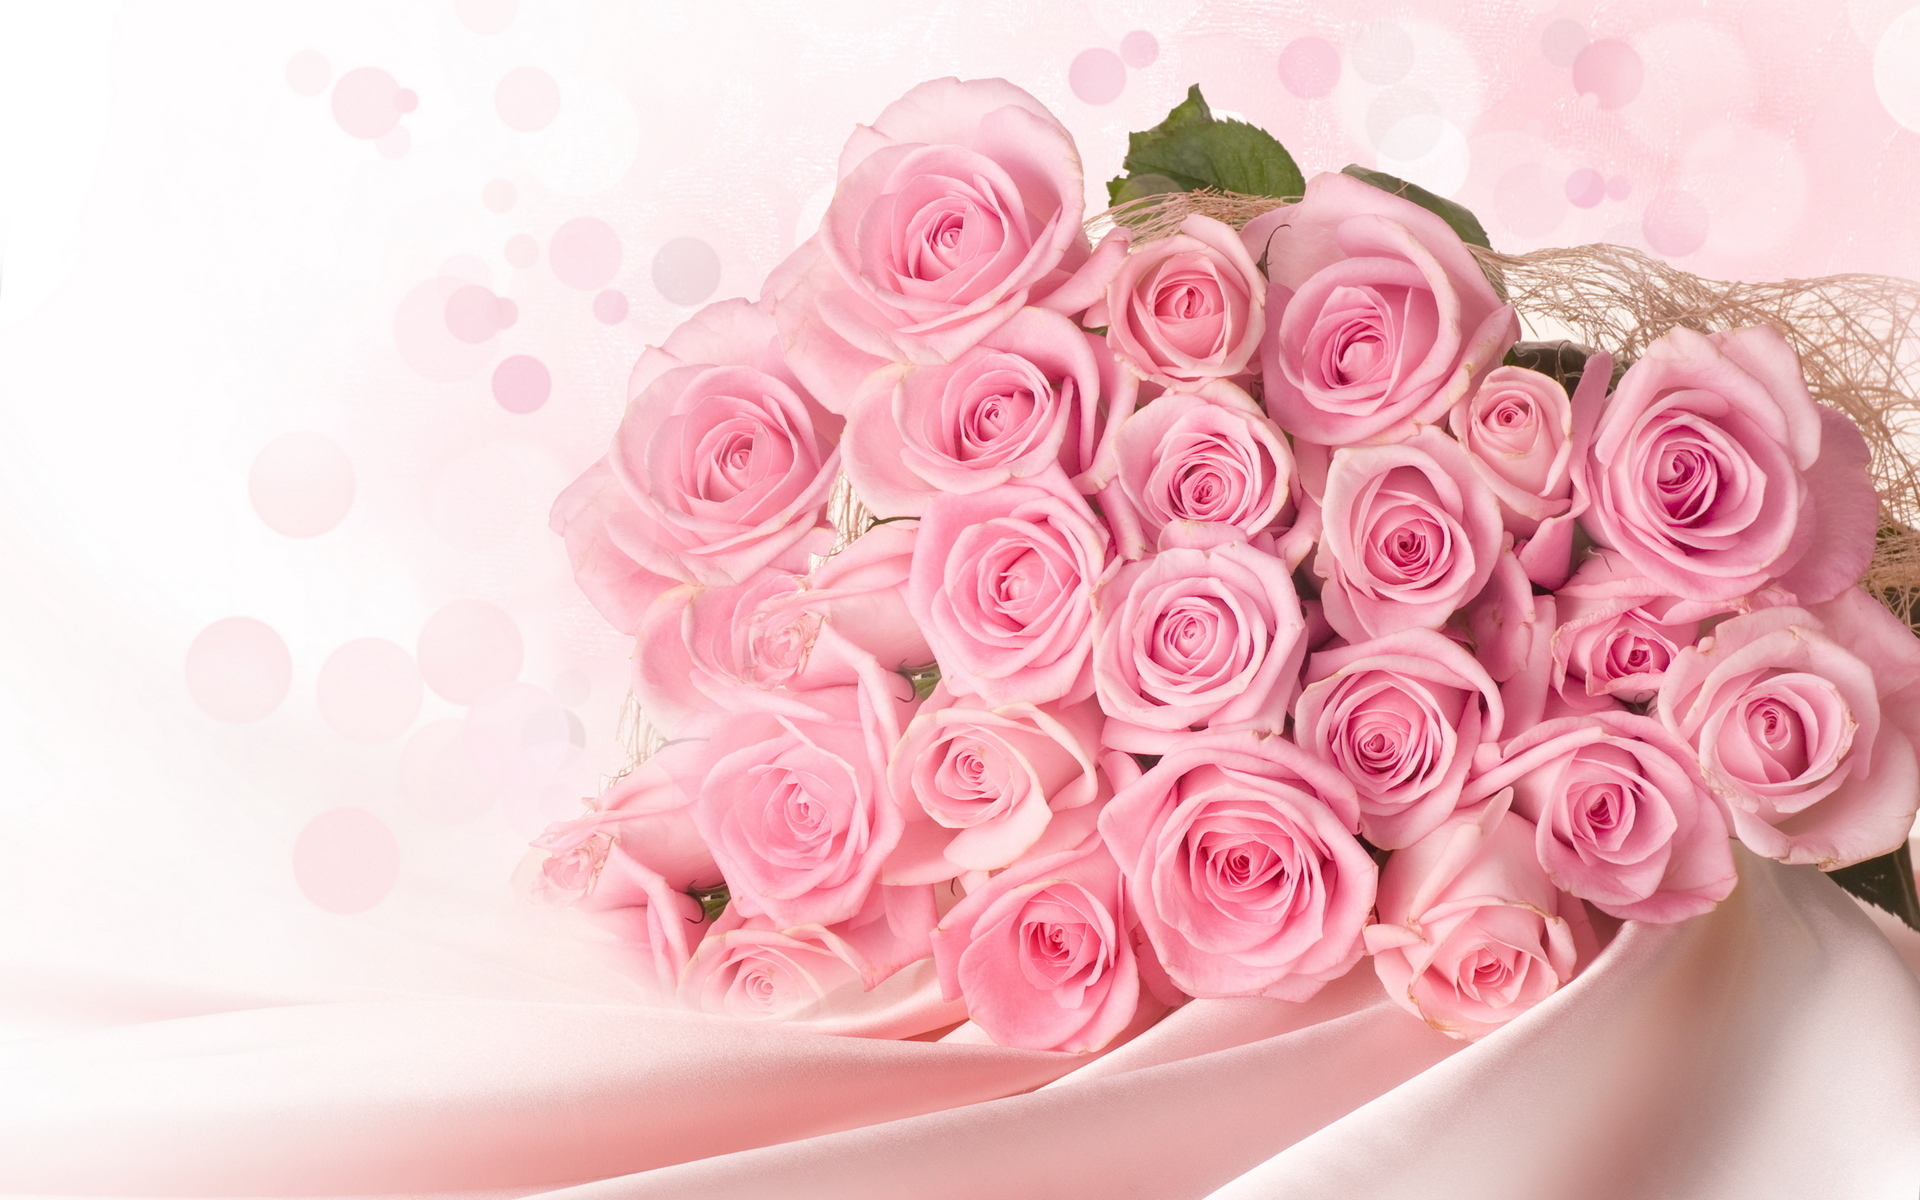 Pink Roses Background - Wallpaper, High Definition, High Quality ...